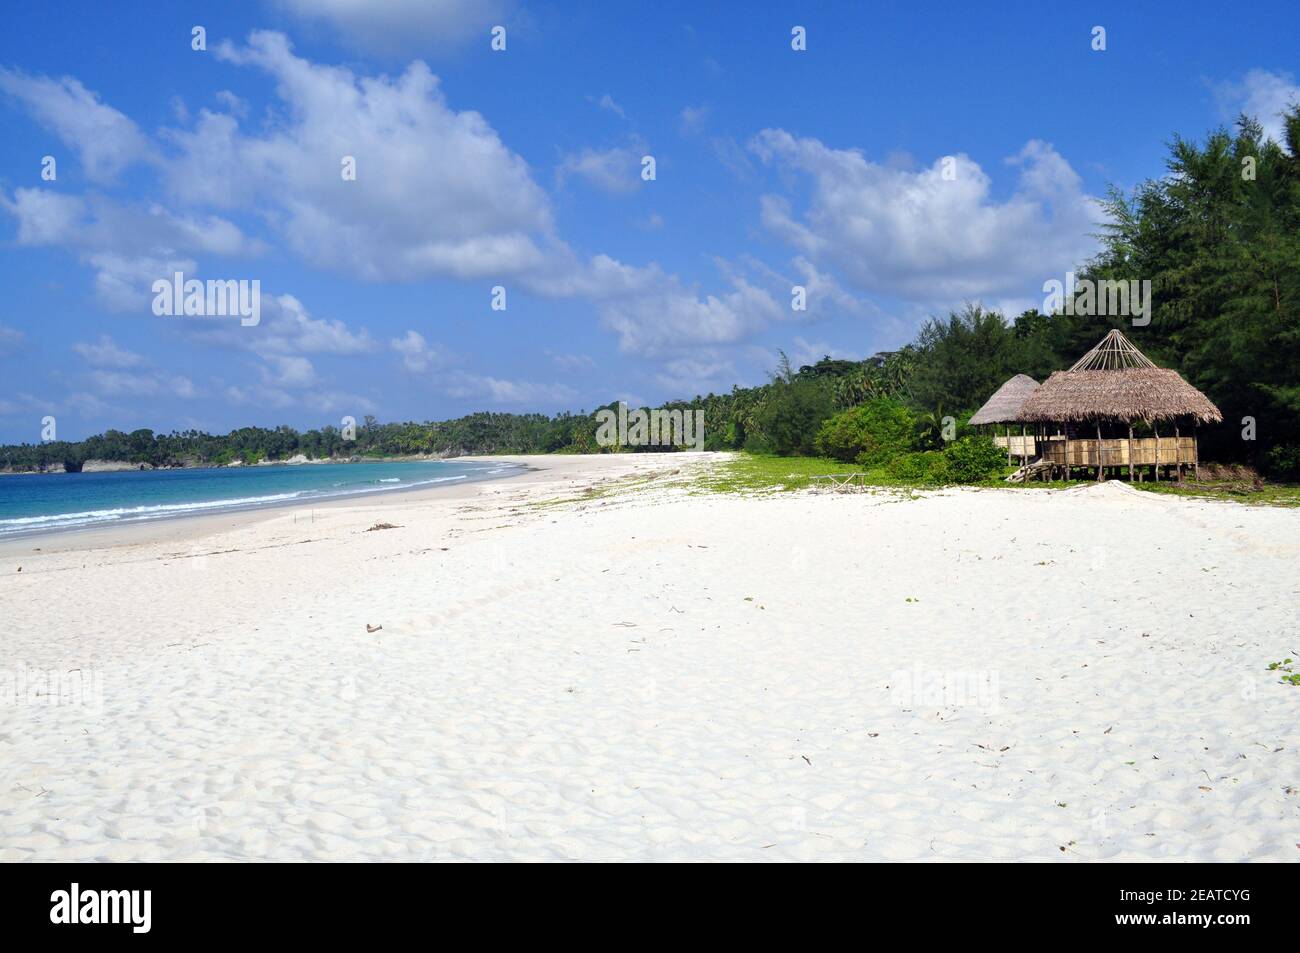 A picturesque tropical beach in Andaman and Nicobar Islands, India, Asia. Stock Photo